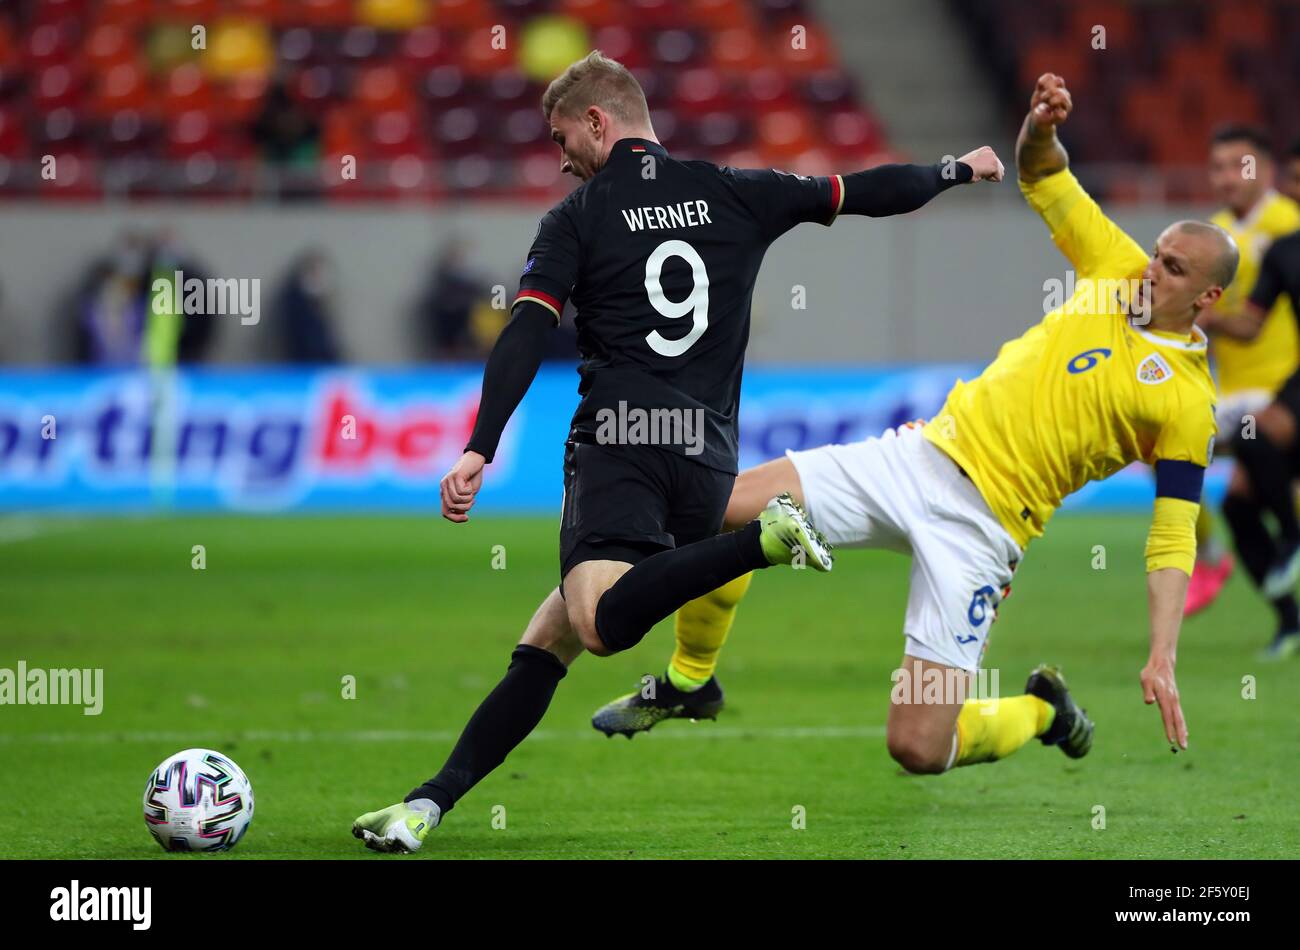 Bukarest, Romania. 28th Mar, 2021. Football: World Cup Qualification Europe, Romania - Germany, Group Stage, Group J, Matchday 2 at Arena Nationala. Germany's Timo Werner (l) and Romania's Vlad Chiriches battle for the ball. IMPORTANT NOTE: In accordance with the regulations of the DFL Deutsche Fußball Liga and the DFB Deutscher Fußball-Bund, it is prohibited to use or have used photographs taken in the stadium and/or of the match in the form of sequence pictures and/or video-like photo series. Credit: Stefan Constantin/dpa/Alamy Live News Stock Photo